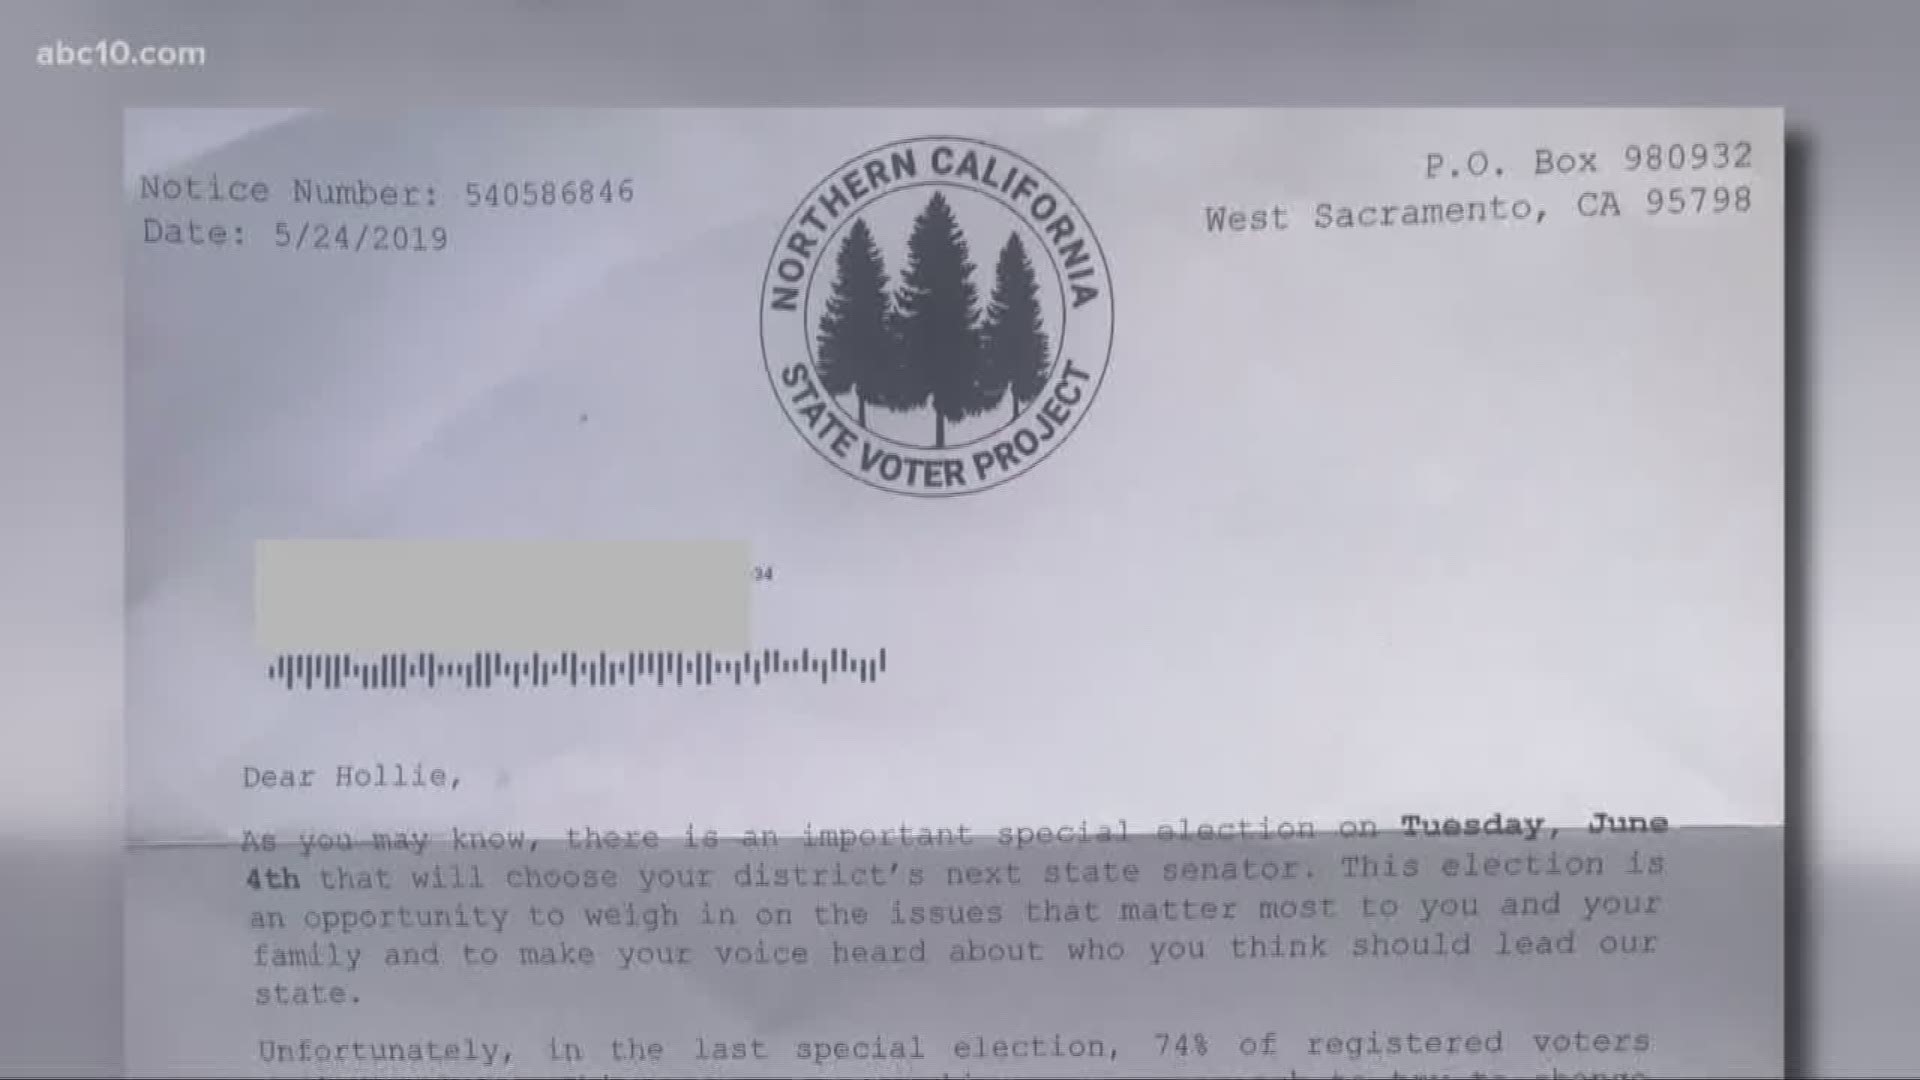 The California Secretary of State’s office is looking into mysterious letters being mailed to voters ahead of the June 4 special election. Some residents feel the letters are “vote shaming” them. Even more puzzling, the letters, sent from a group calling themselves the “Northern California Voter Project” doesn’t seem to exist at all.